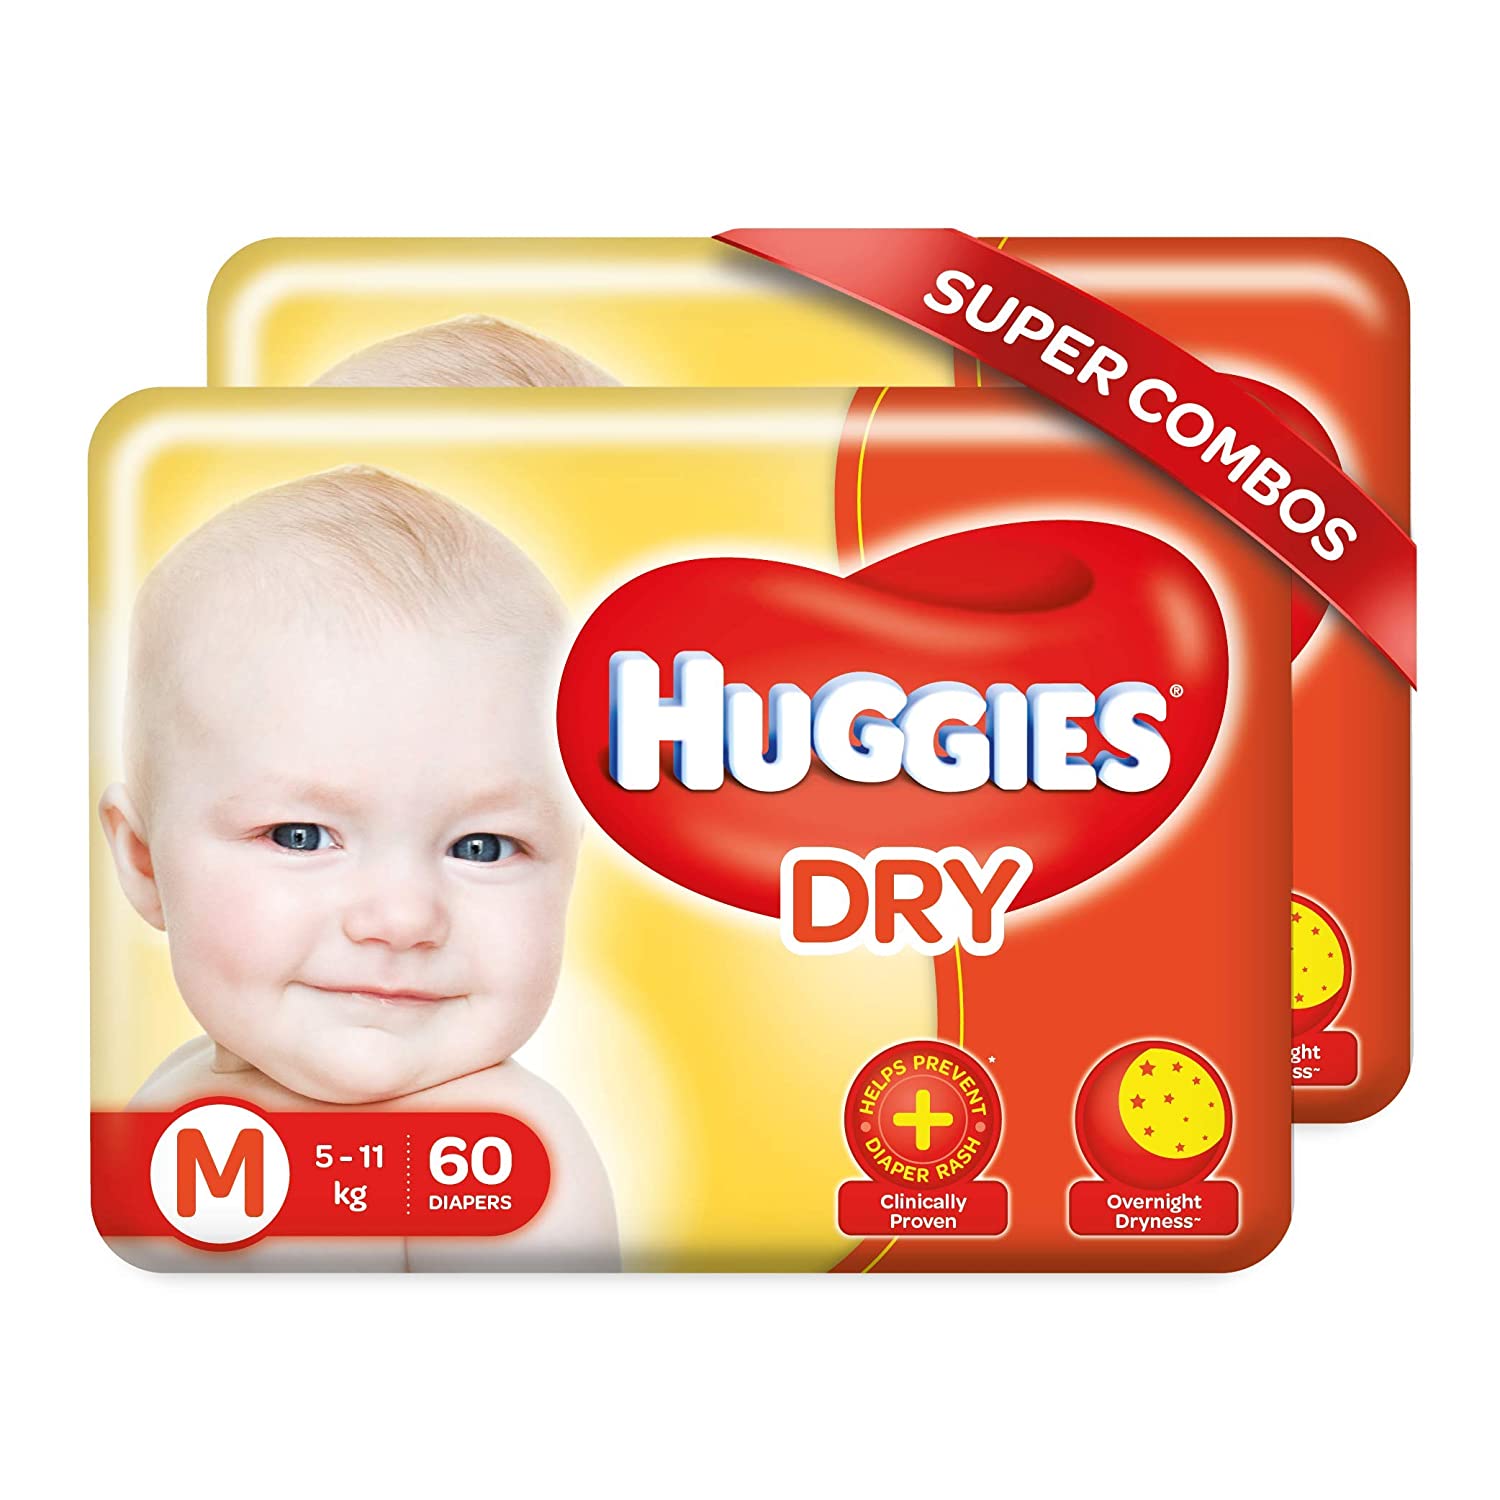 Huggies Complete Comfort Dry Tape Medium (M) Size Baby Tape Diapers, Combo Pack of 2, 60 count per pack, 120 count, with 5 in 1 Comfort